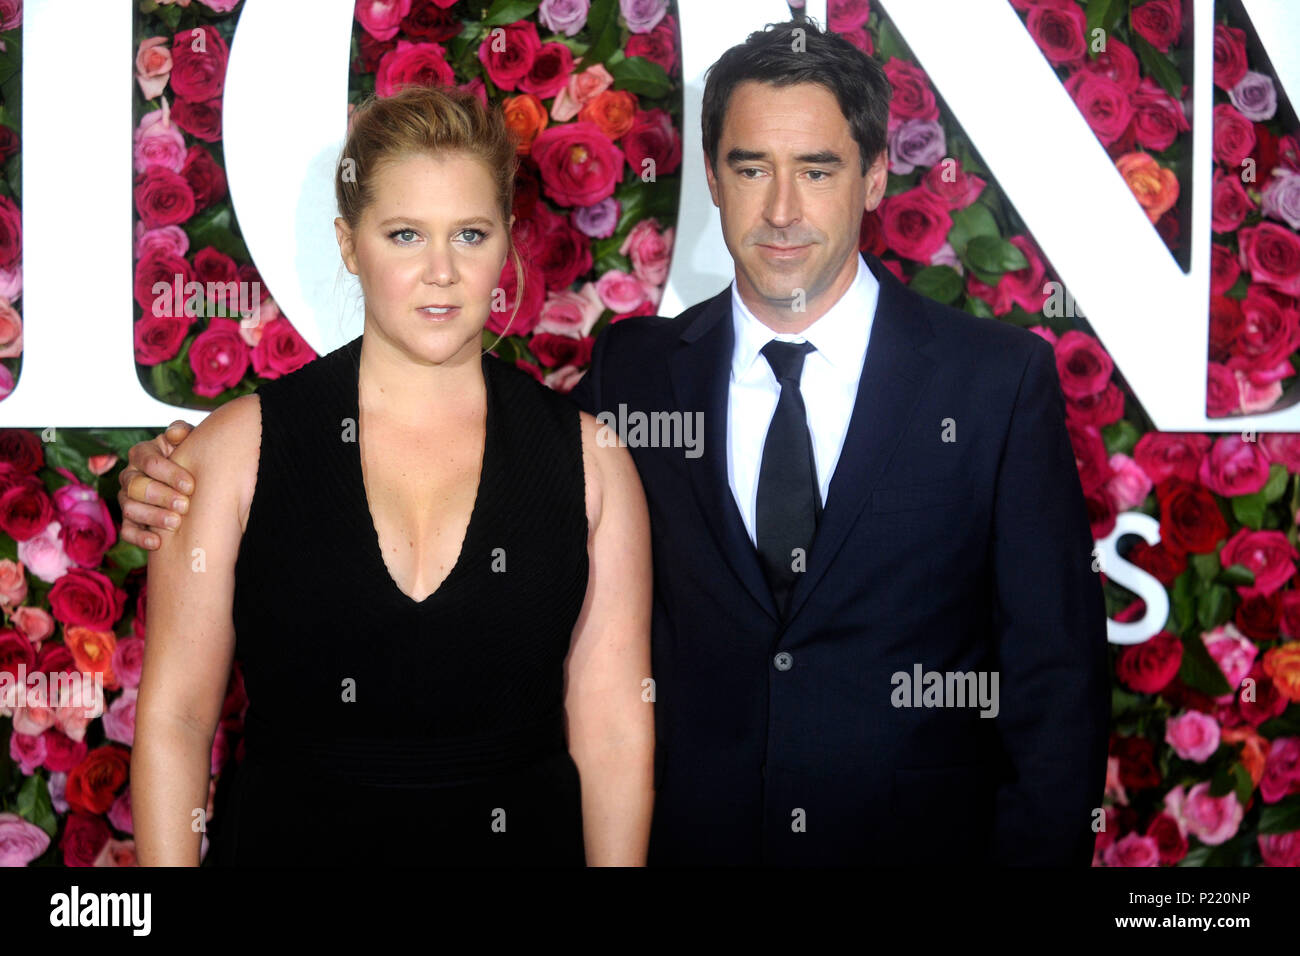 Amy Schumer and her husband Chris Fischer attending the 72nd Annual Tony Awards 2018 at the Radio City Music Hall on June 10, 2018 in New York City. Stock Photo